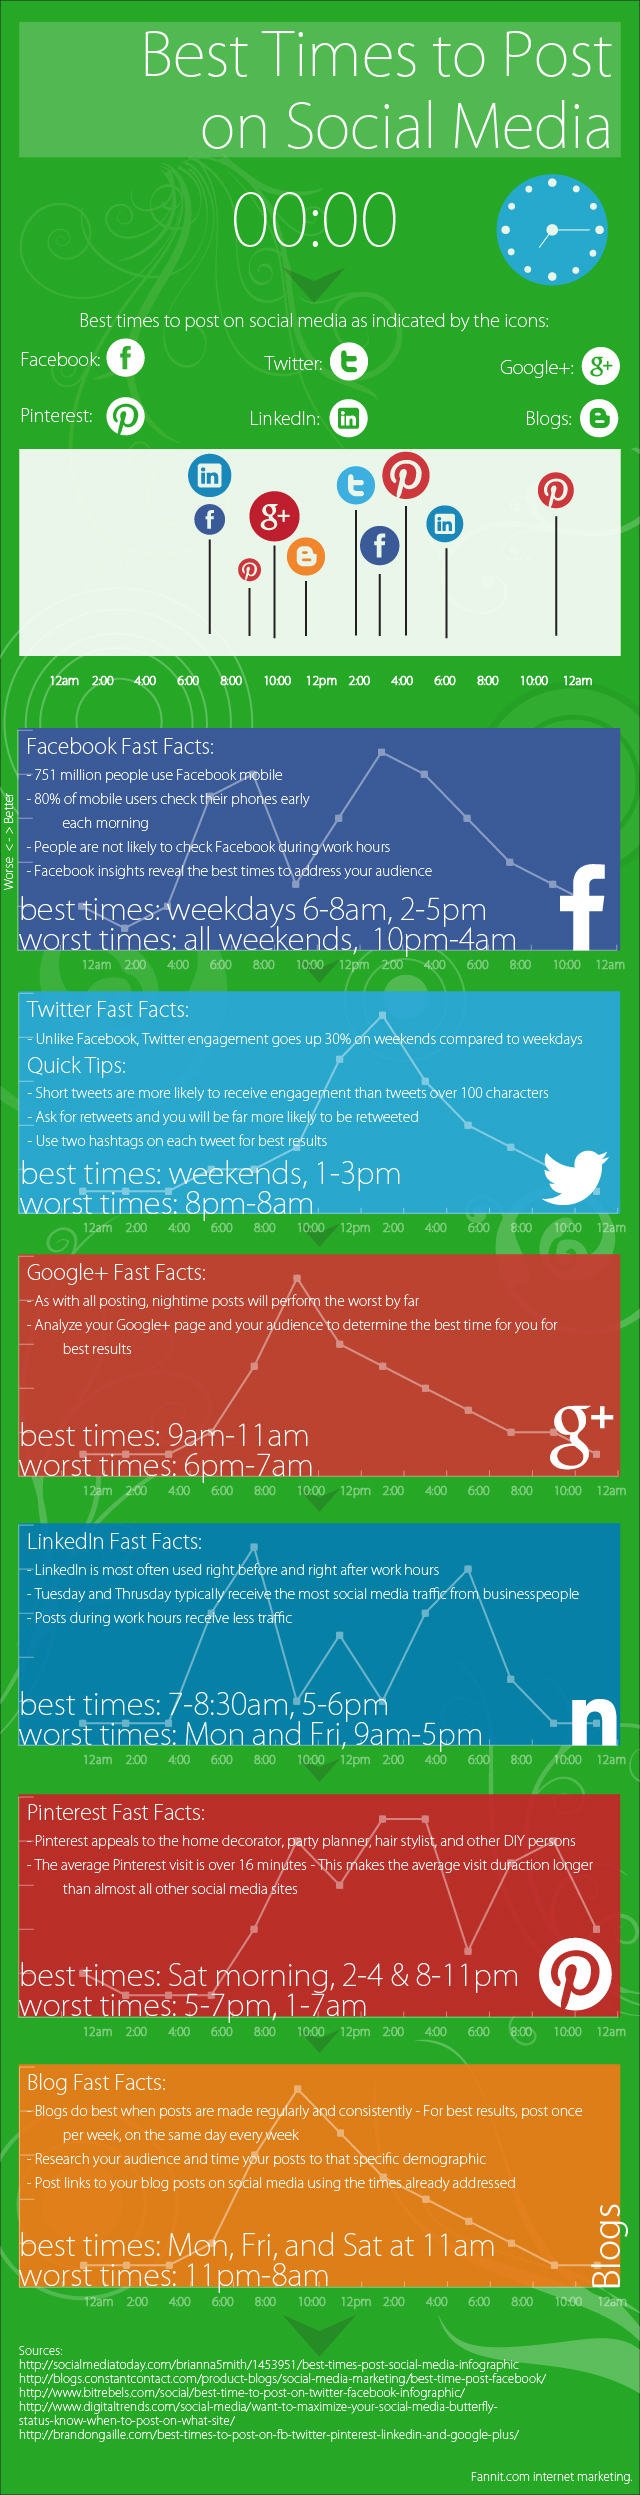 What is the best time to post on the social media